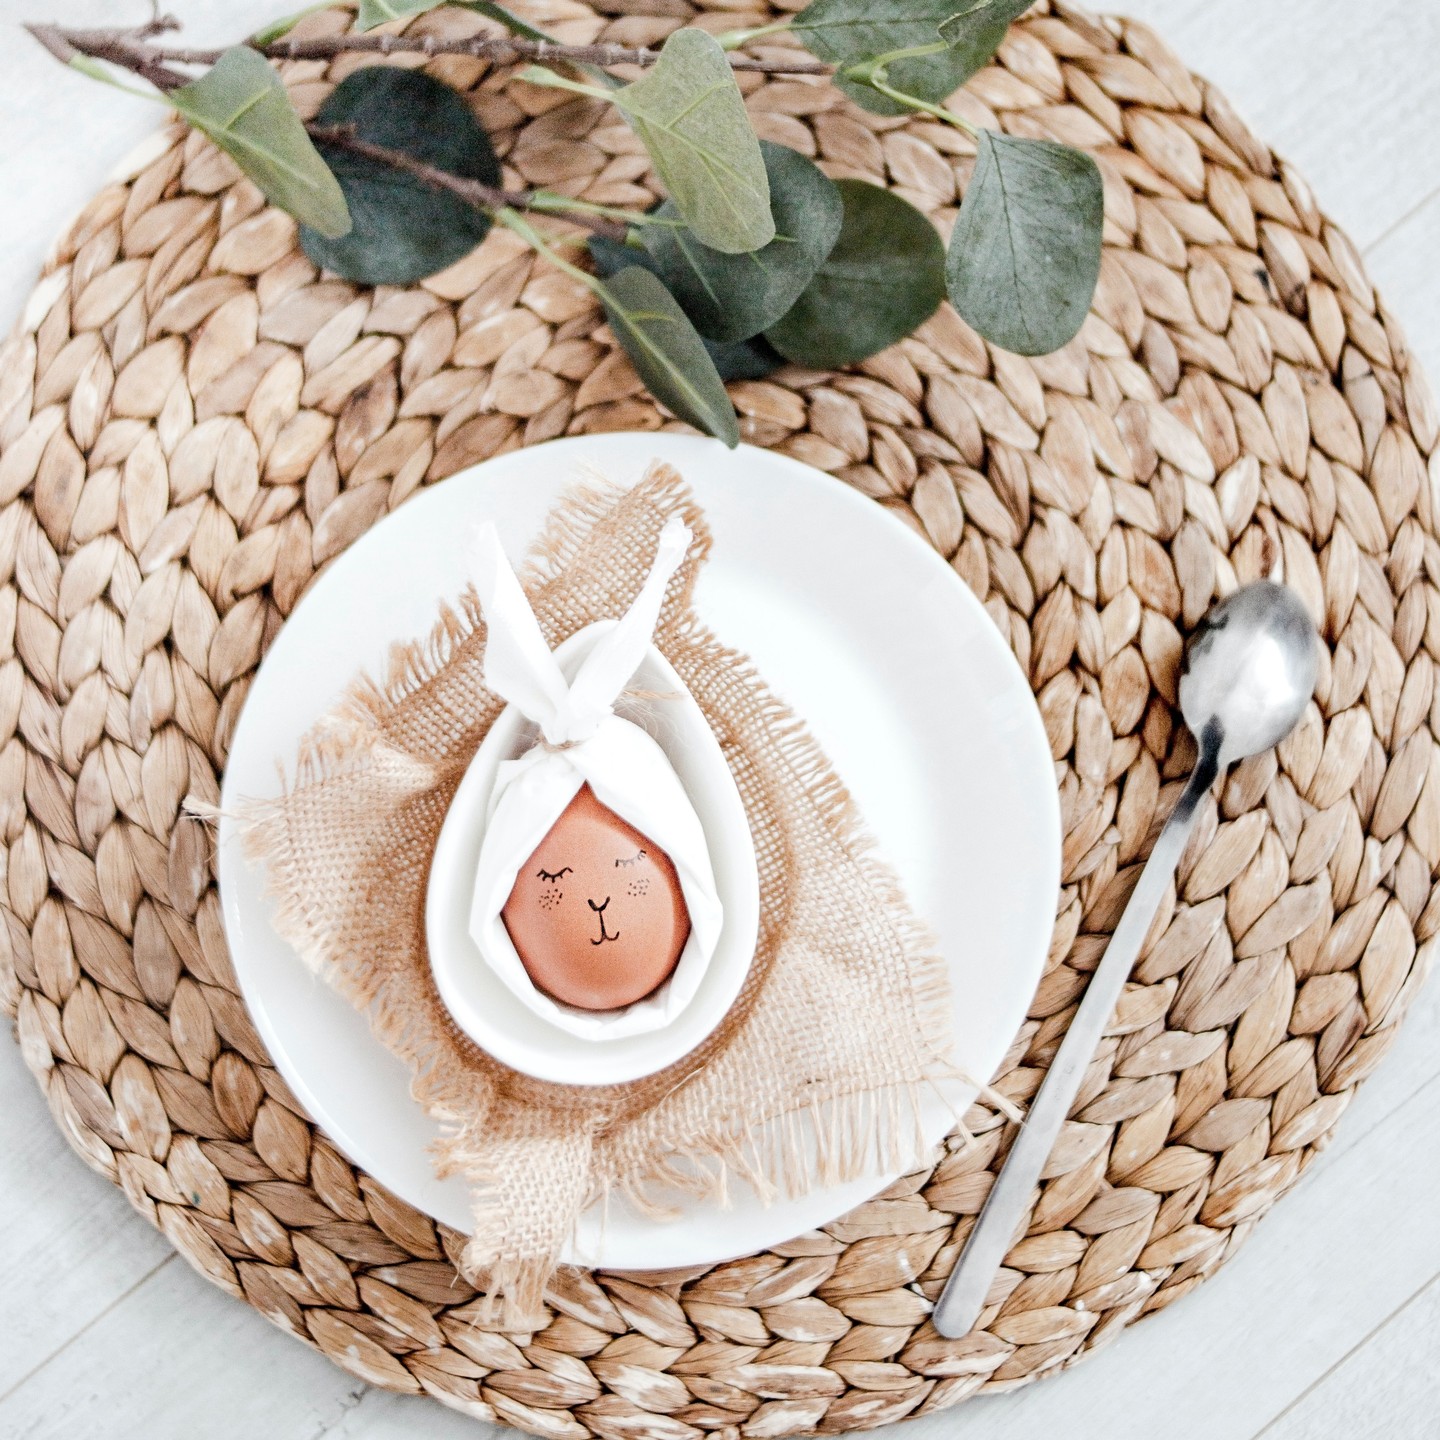 Wishing you all a very Happy Easter from @newtonandkay 🐇🐰💕

#happyeaster #easter #eastereggs #easter2022 #easterinterior #eastertable #easterdecor #easterdecoration #tabledecor #homestyle #interiordesign #interiordesigner #decor #nzinteriors #interiordesignnz #nzinteriordesign #interiorinspo #interiorstyling